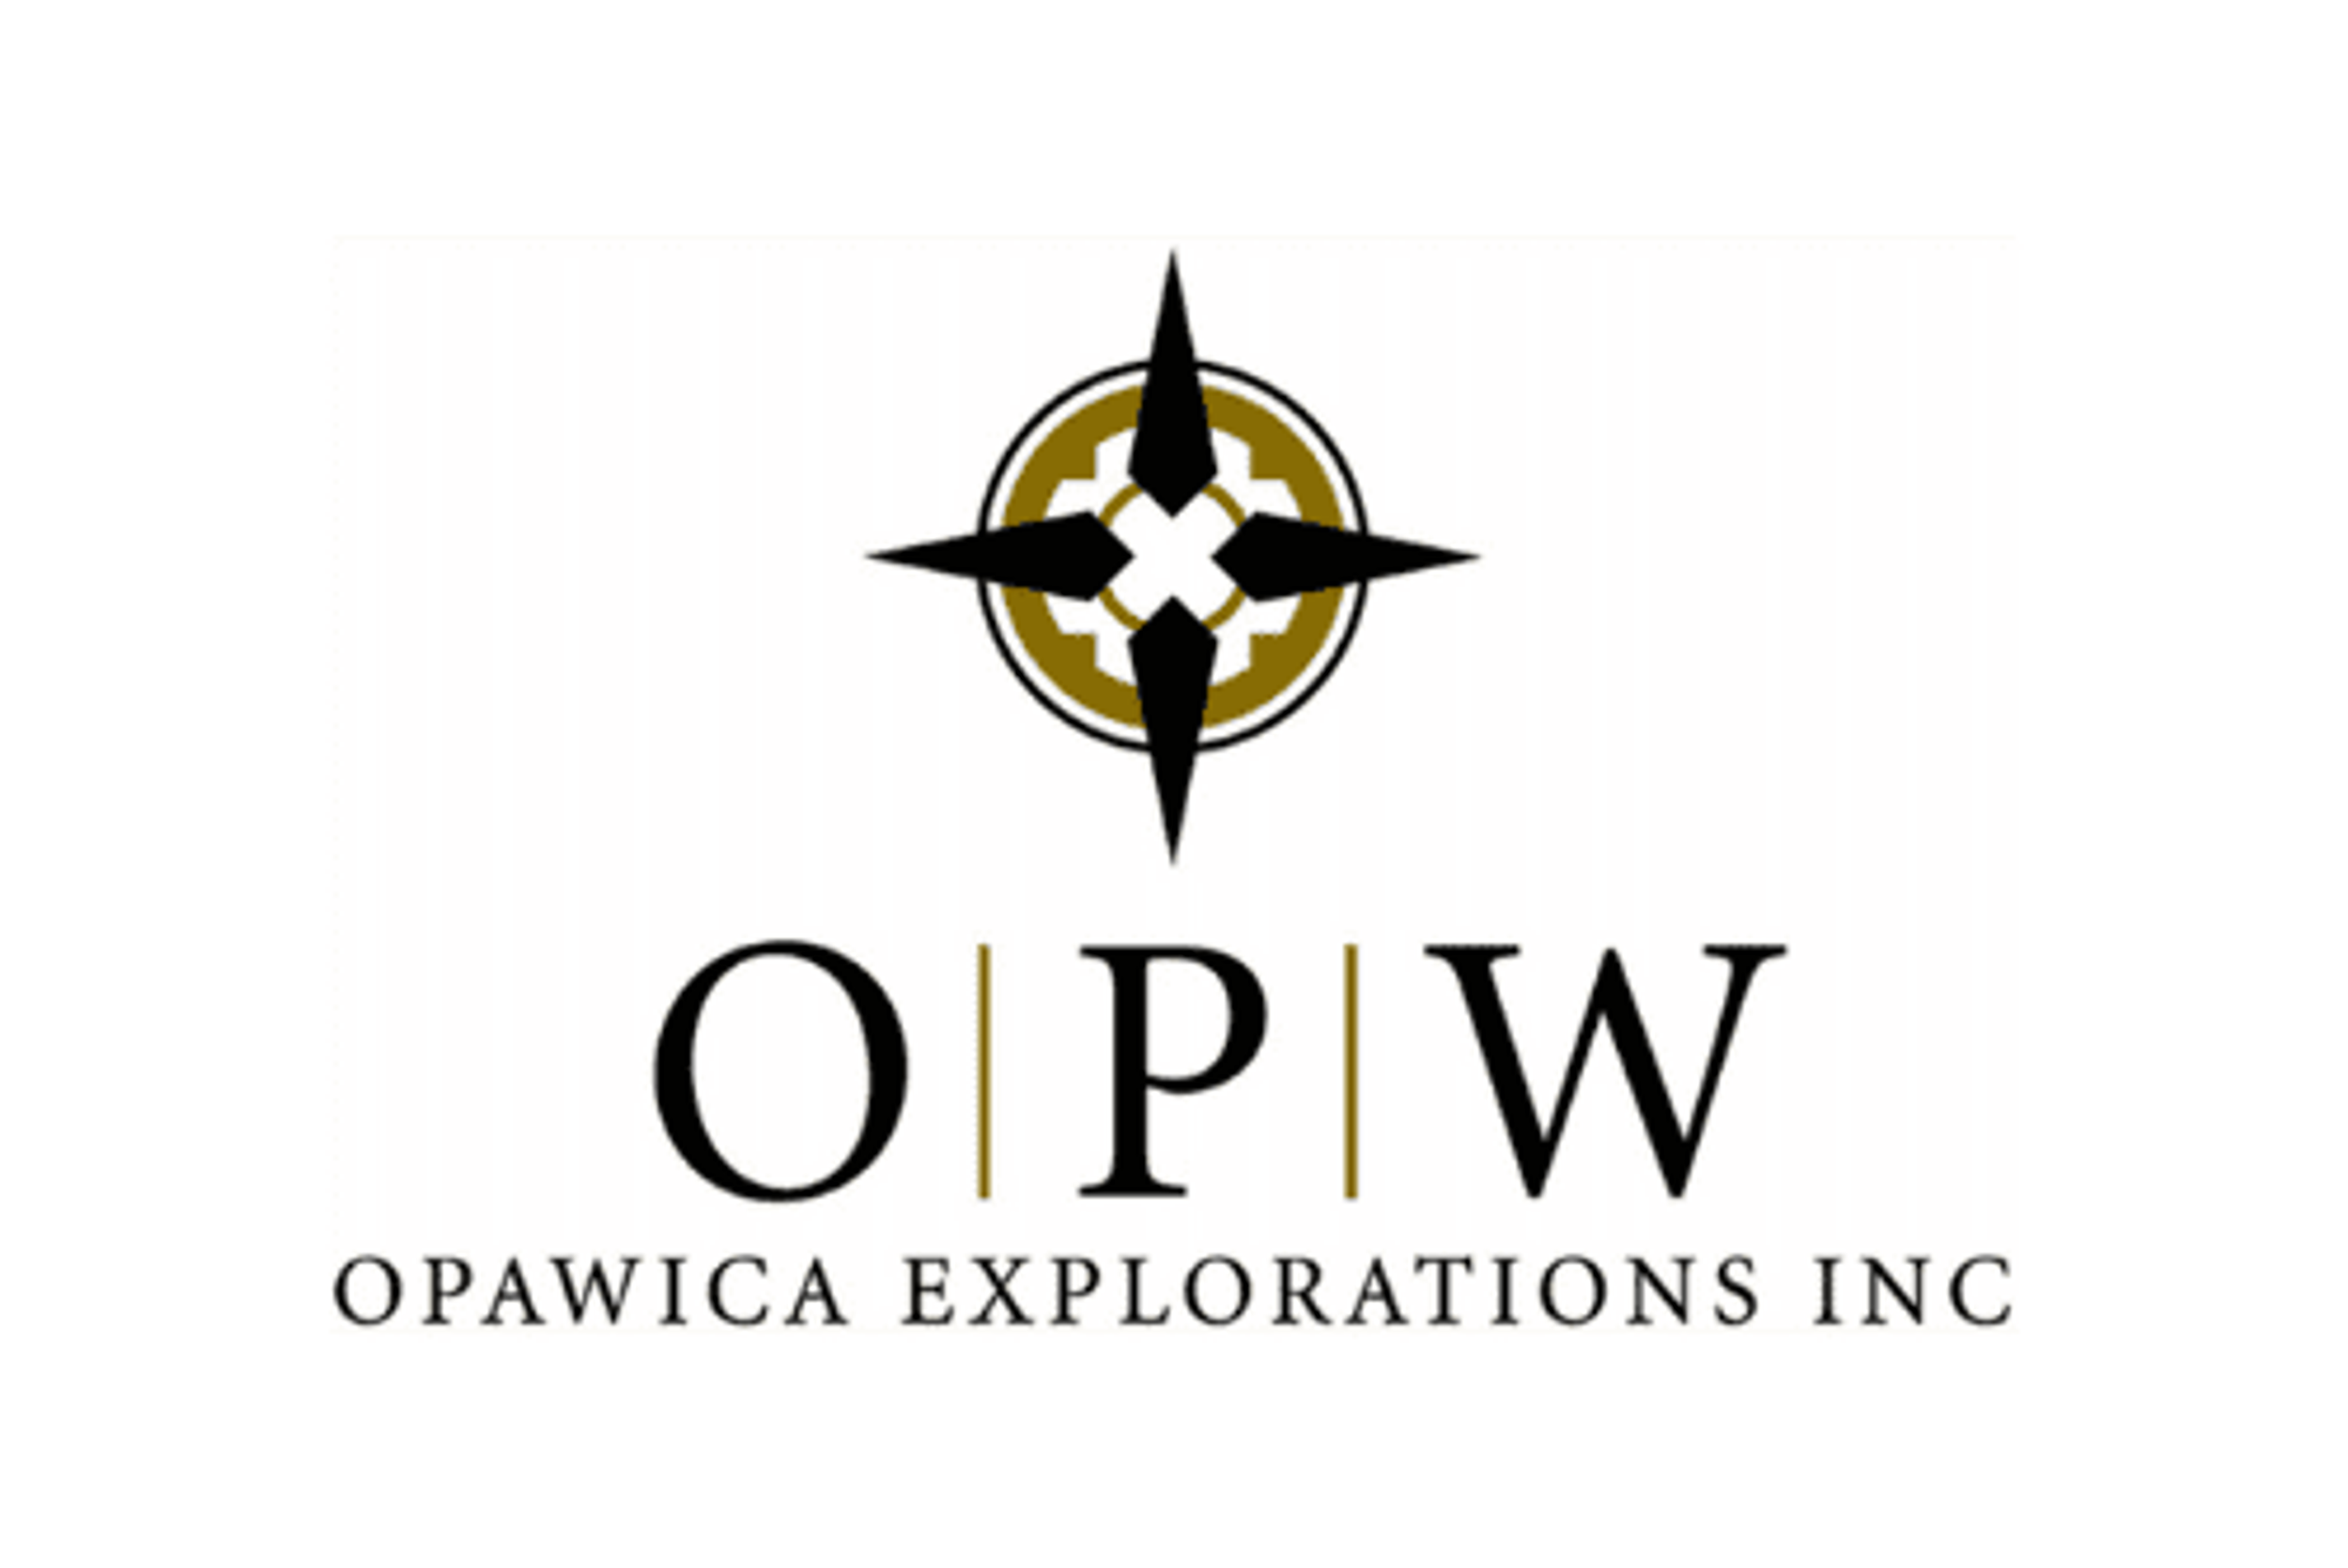 Opawica Files Annual Audited Financial Statements for Recovation of Cease Trade Order